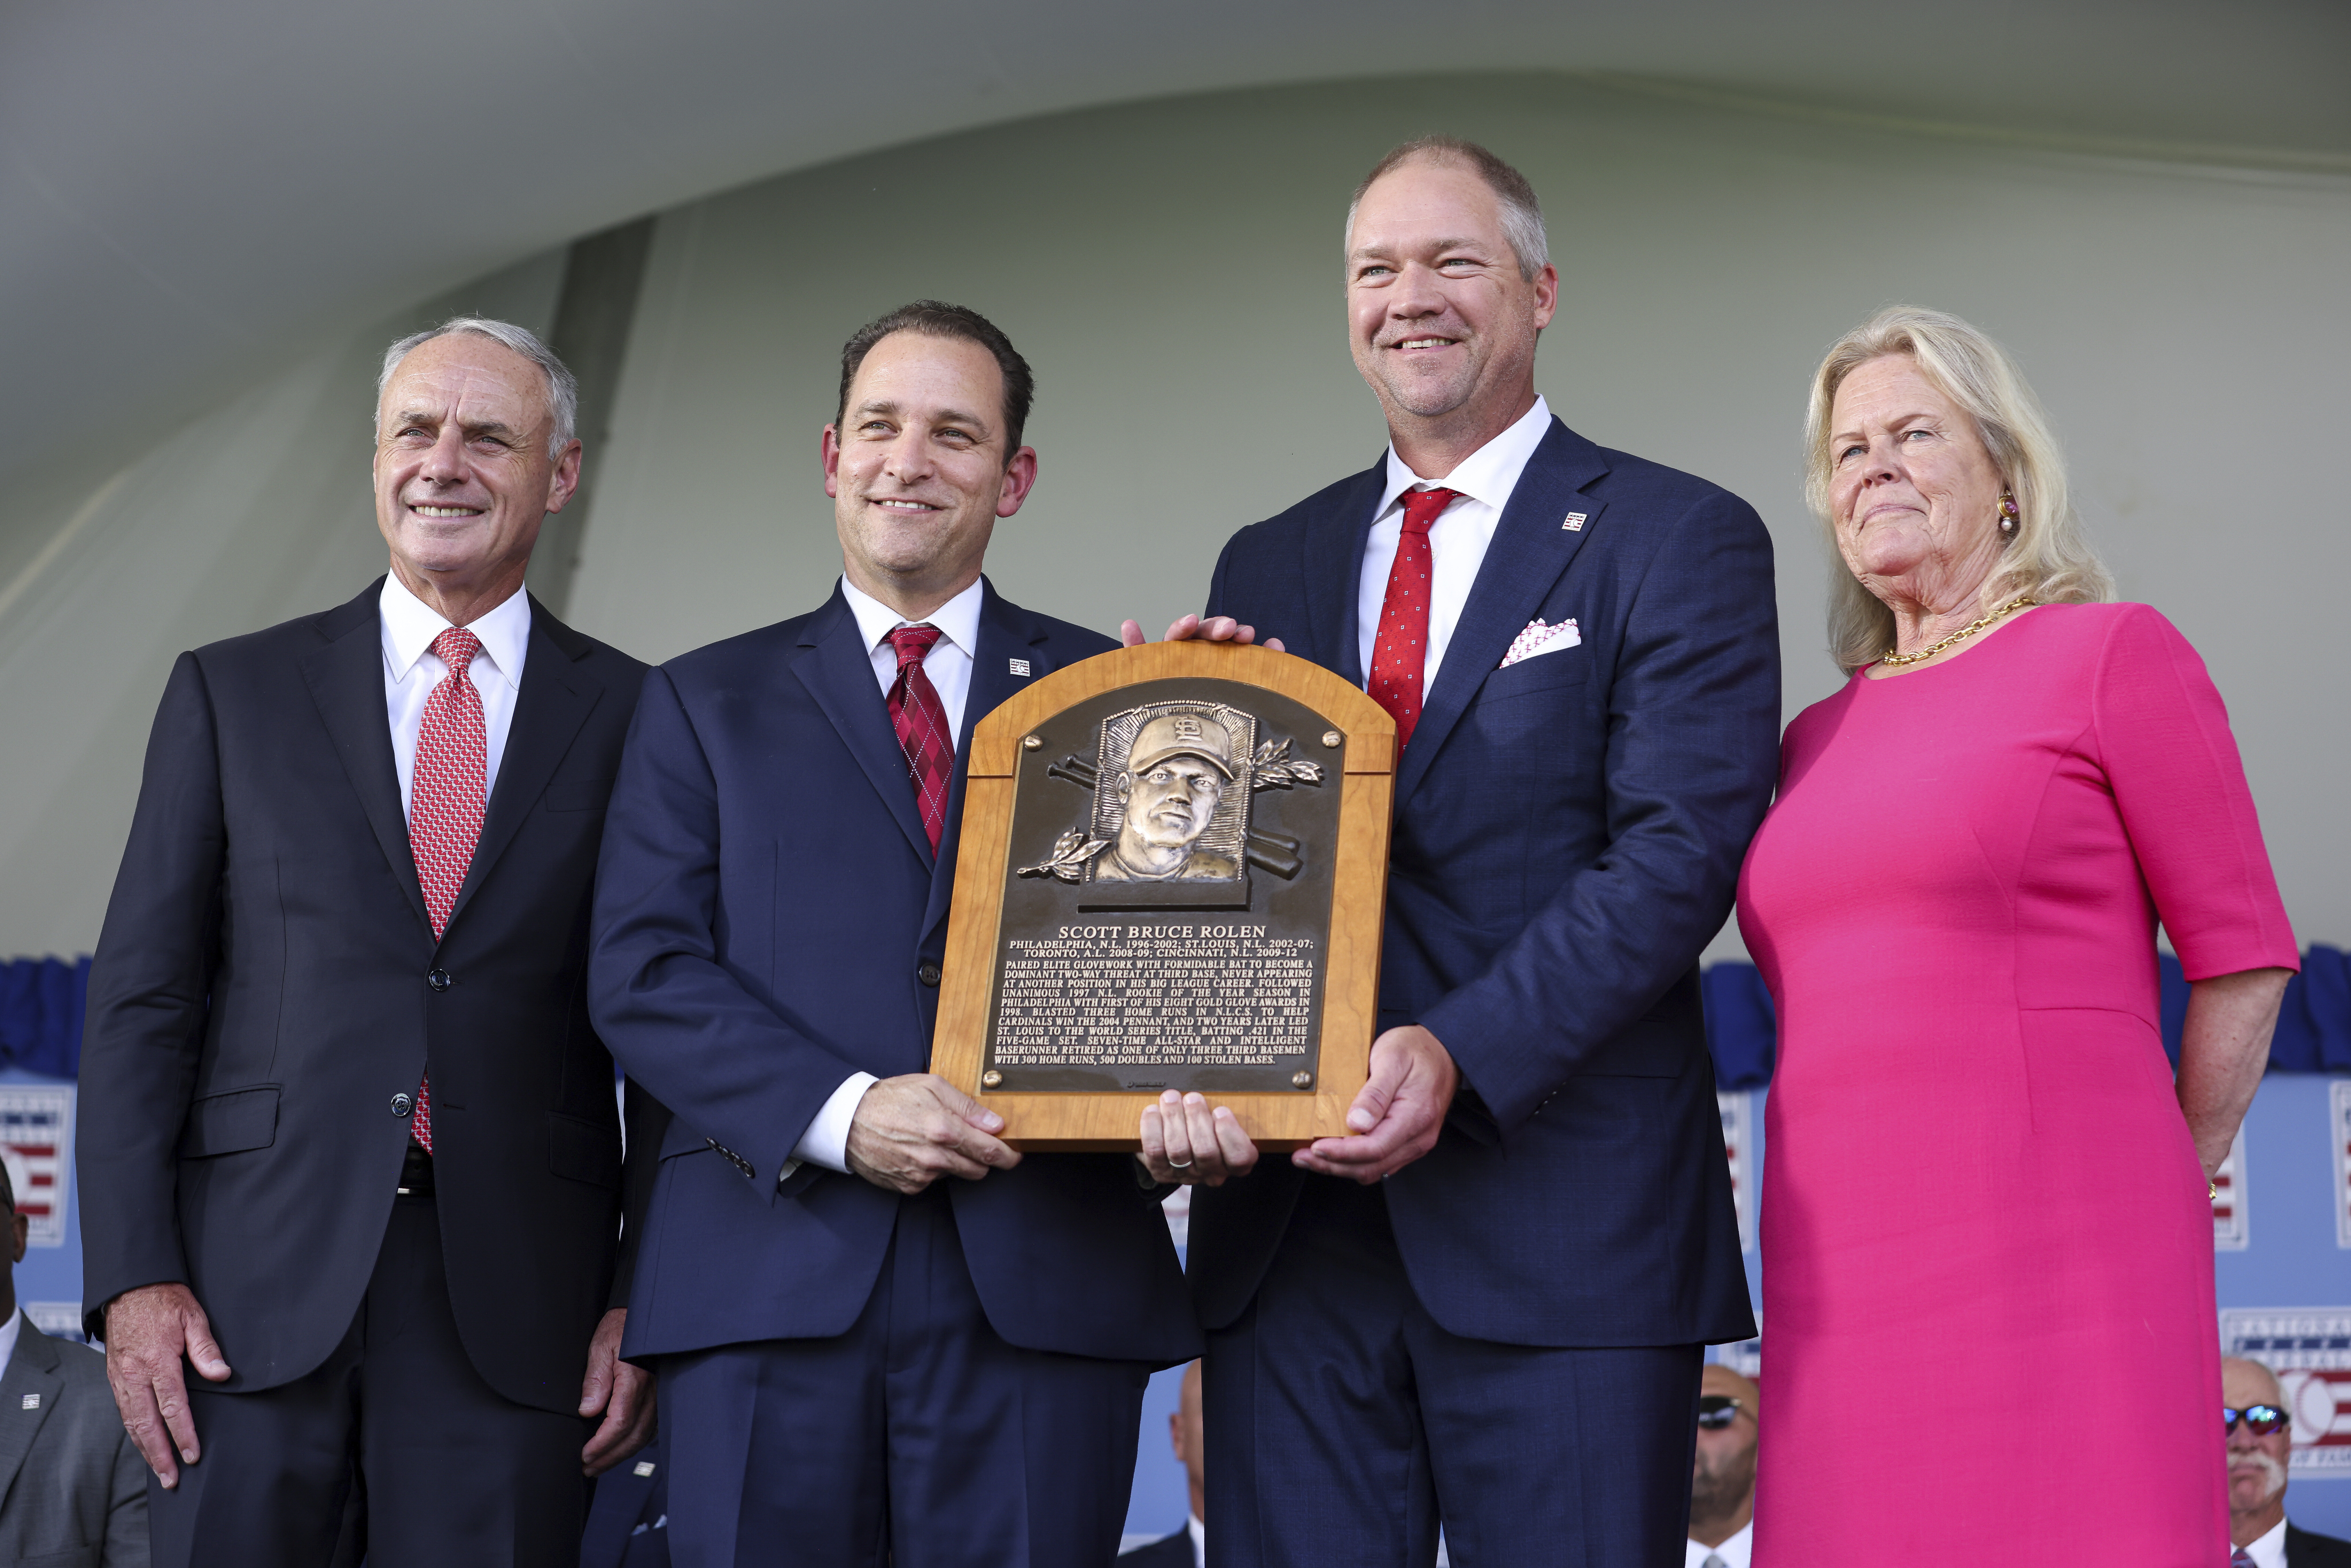 Scott Rolen credits his parents, Fred McGriff thanks fellow players at Hall  of Fame induction - West Hawaii Today